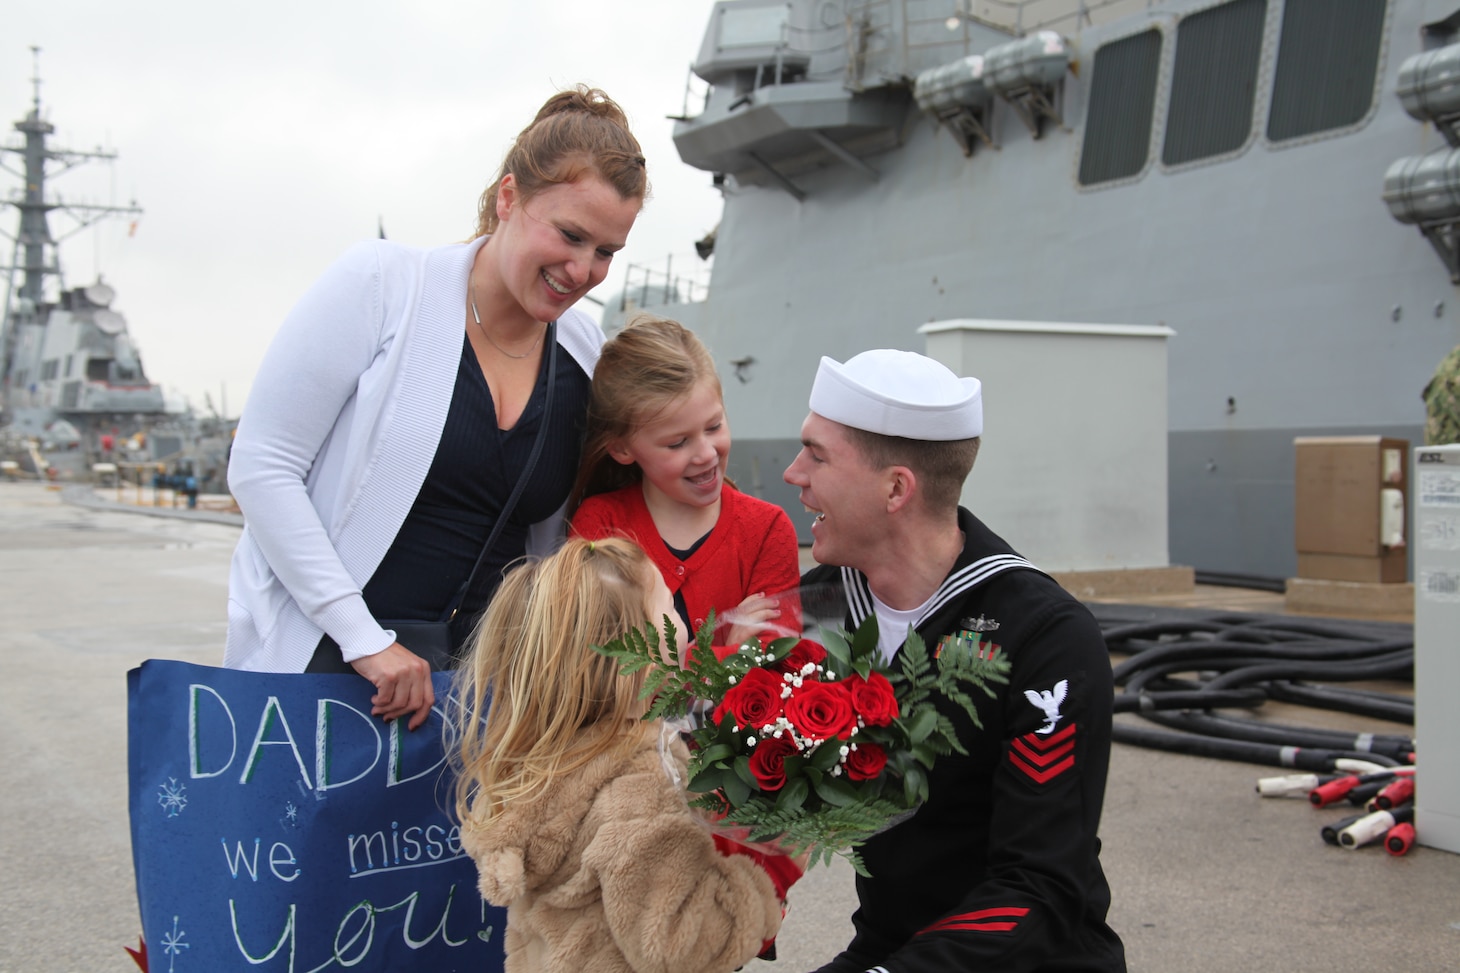 Gas Turbine System Technician First Class Kristofer Black is greeted by family after the Arleigh Burke-class guided missile destroyer USS Arleigh Burke (DDG 51) returned to Rota, Spain, Dec. 23, 2021, completing her inaugural patrol as a member of the U.S. Navy’s Forward Deployed Naval Forces-Europe (FDNF-E). Arleigh Burke, forward-deployed to Rota, Spain, is on its first patrol in the U.S. Sixth Fleet area of operations in support of U.S. National Security Interests and regional allies and partners.